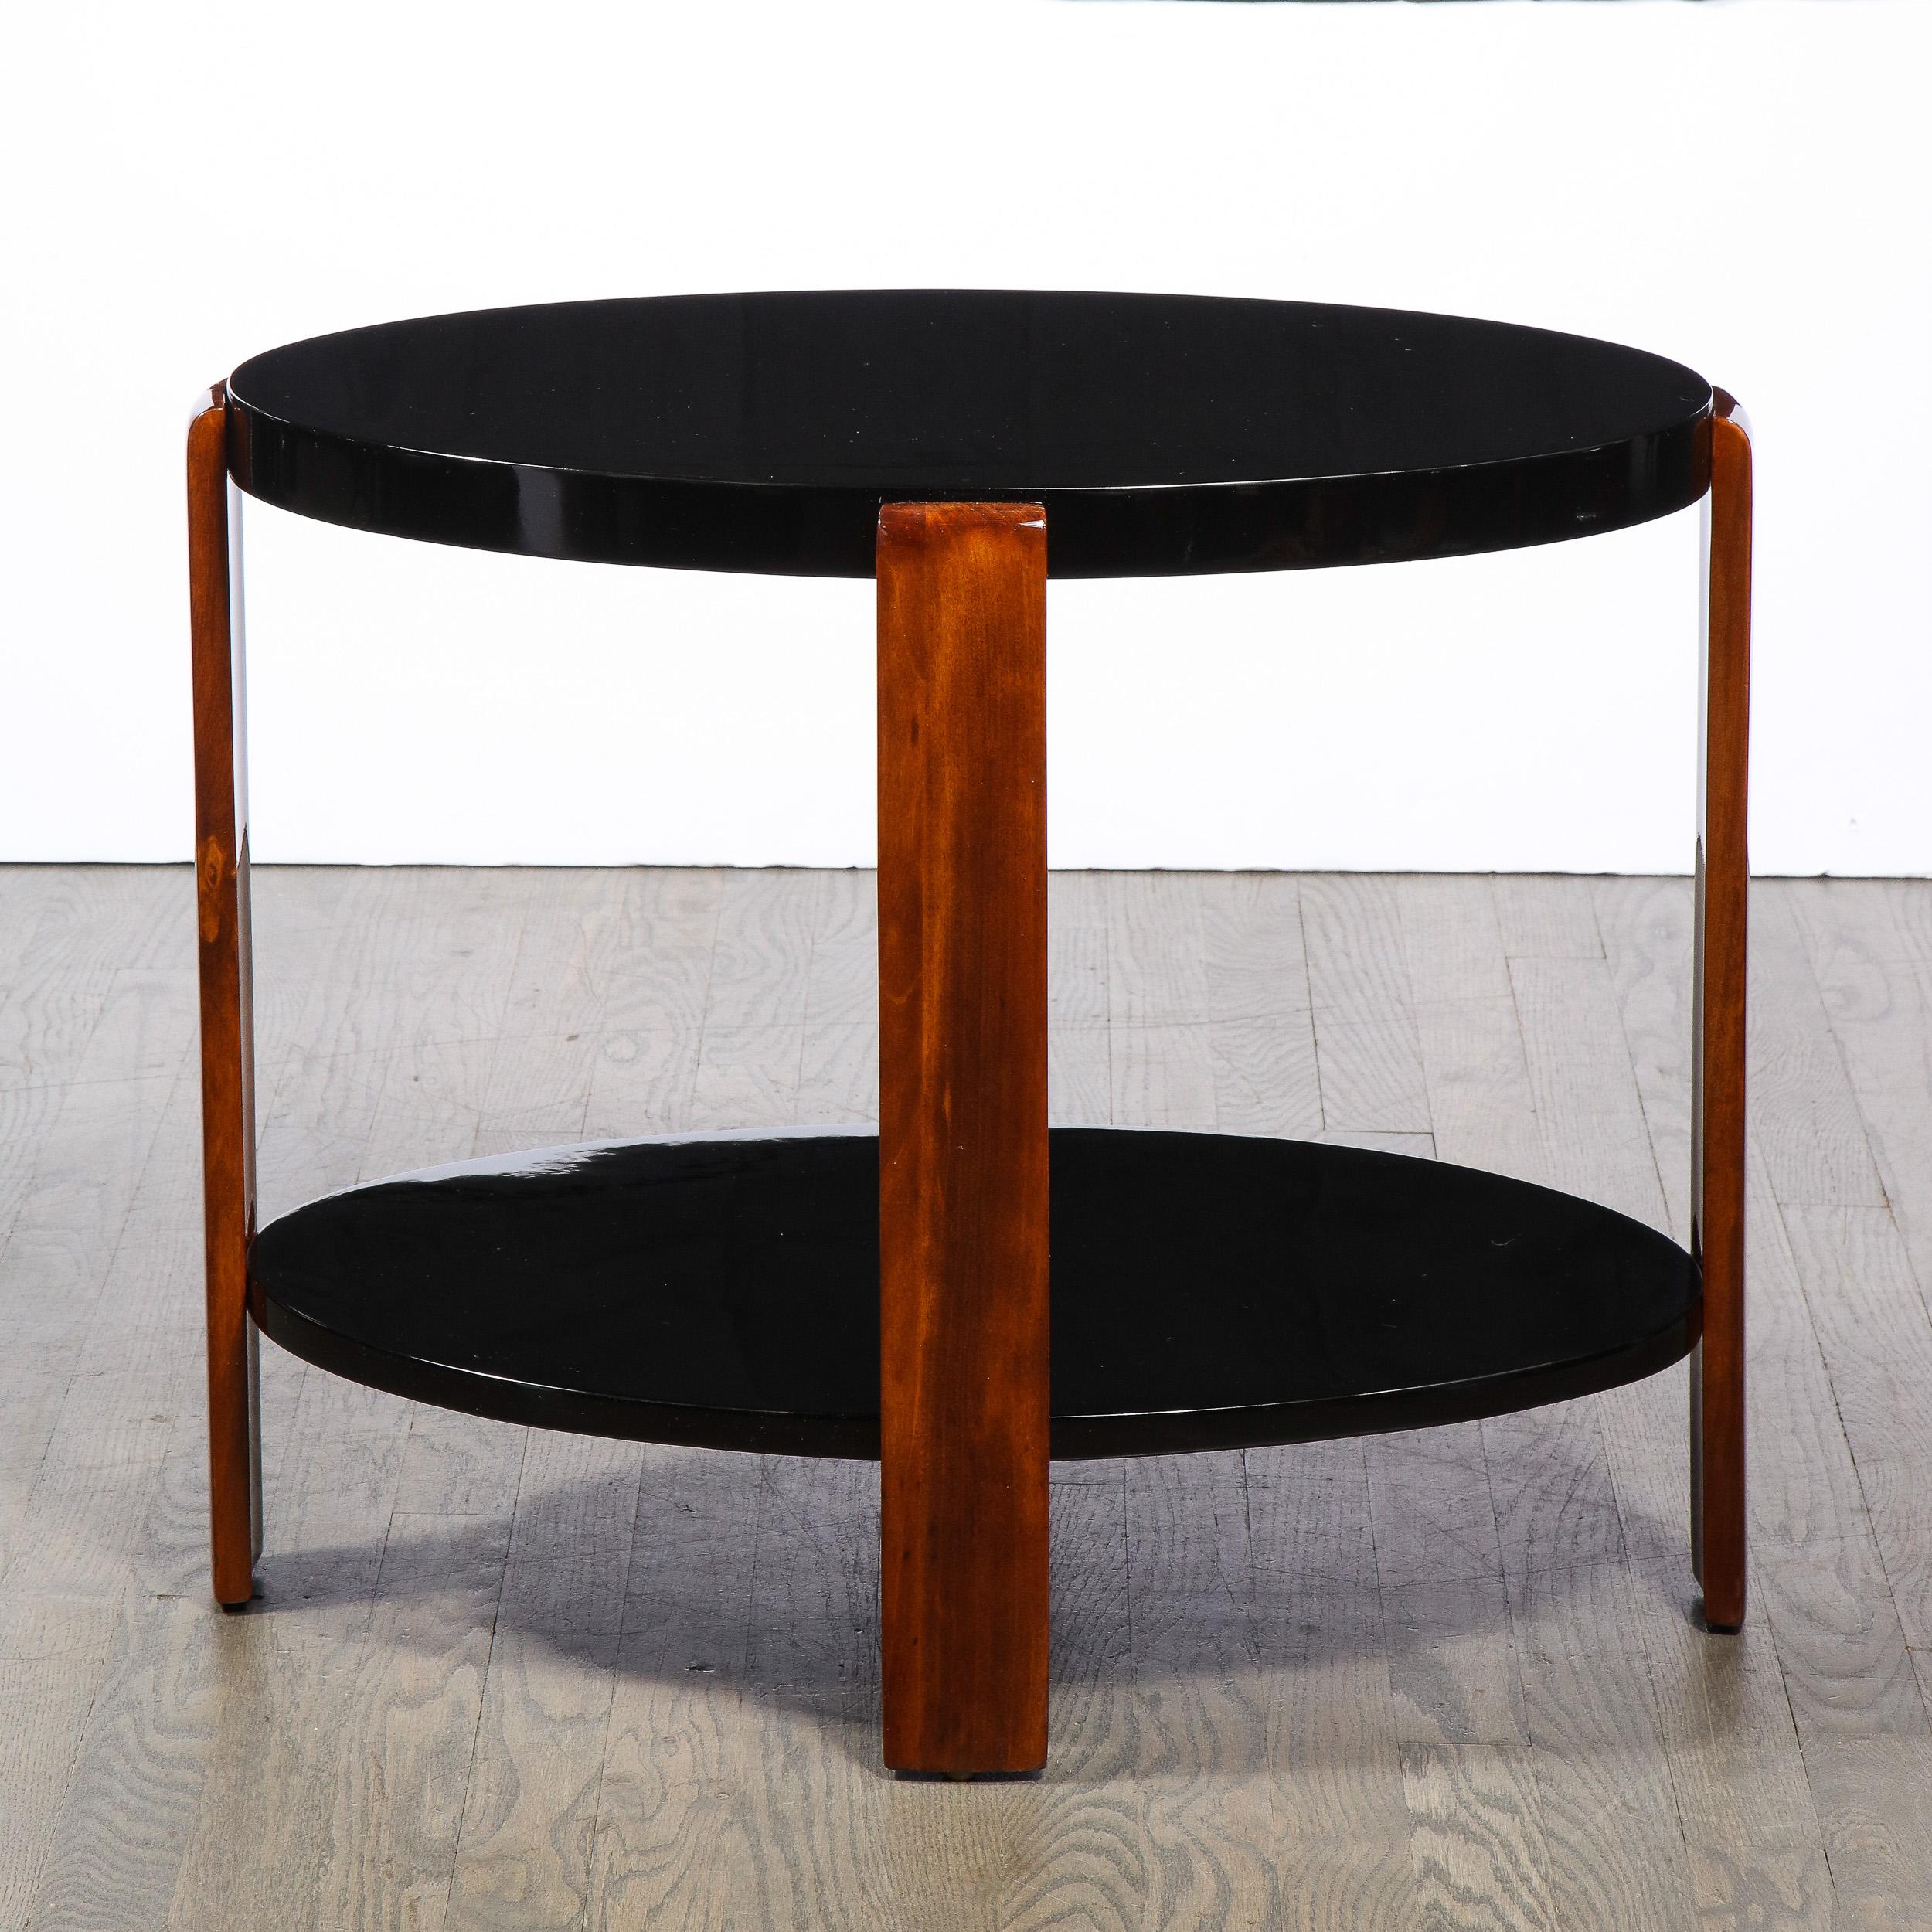 This stunning Art Deco Machine Age table was realized in the United States circa 1935. It offers two ovoid tiers connected via streamlined supports in bookmatched walnut. With its iconically Art Deco sensiblity (and materials) this piece is sure to